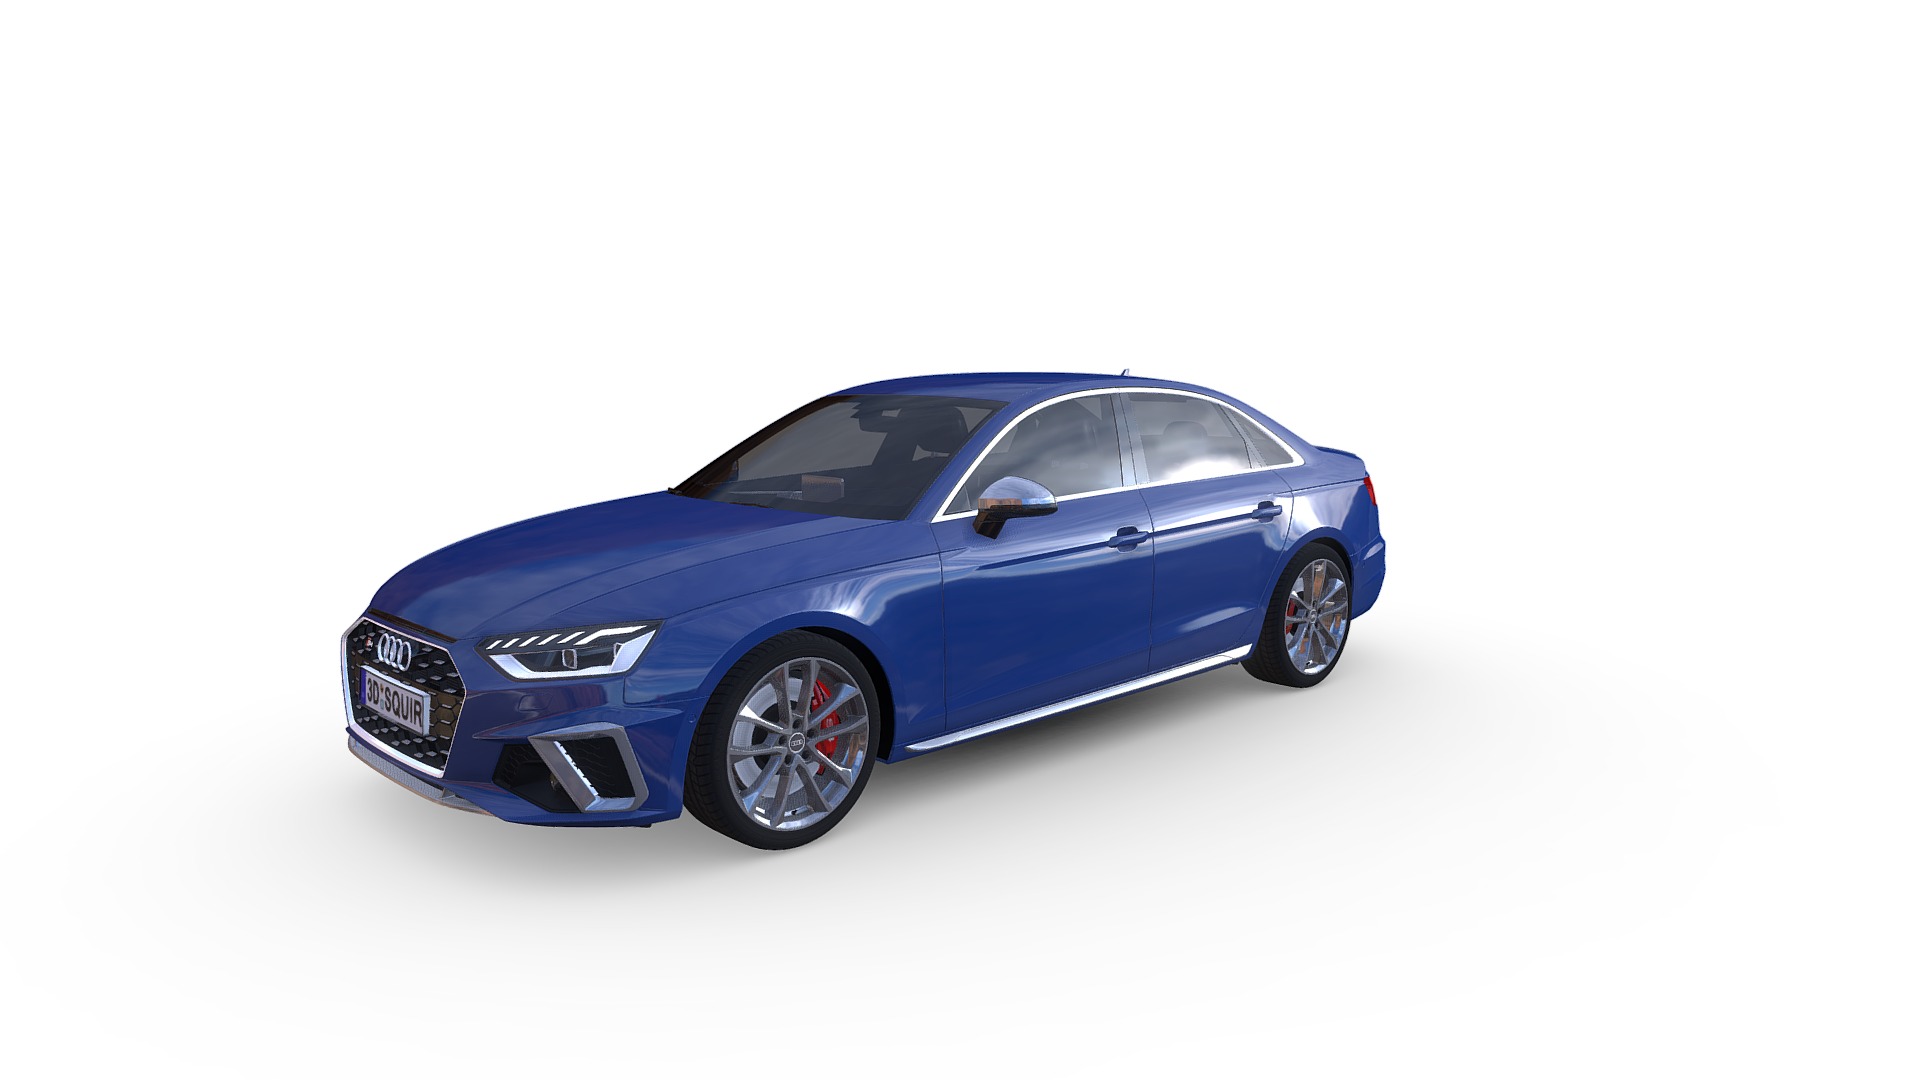 3D model Audi S4 Sedan 2020 - This is a 3D model of the Audi S4 Sedan 2020. The 3D model is about a blue car with a white background.